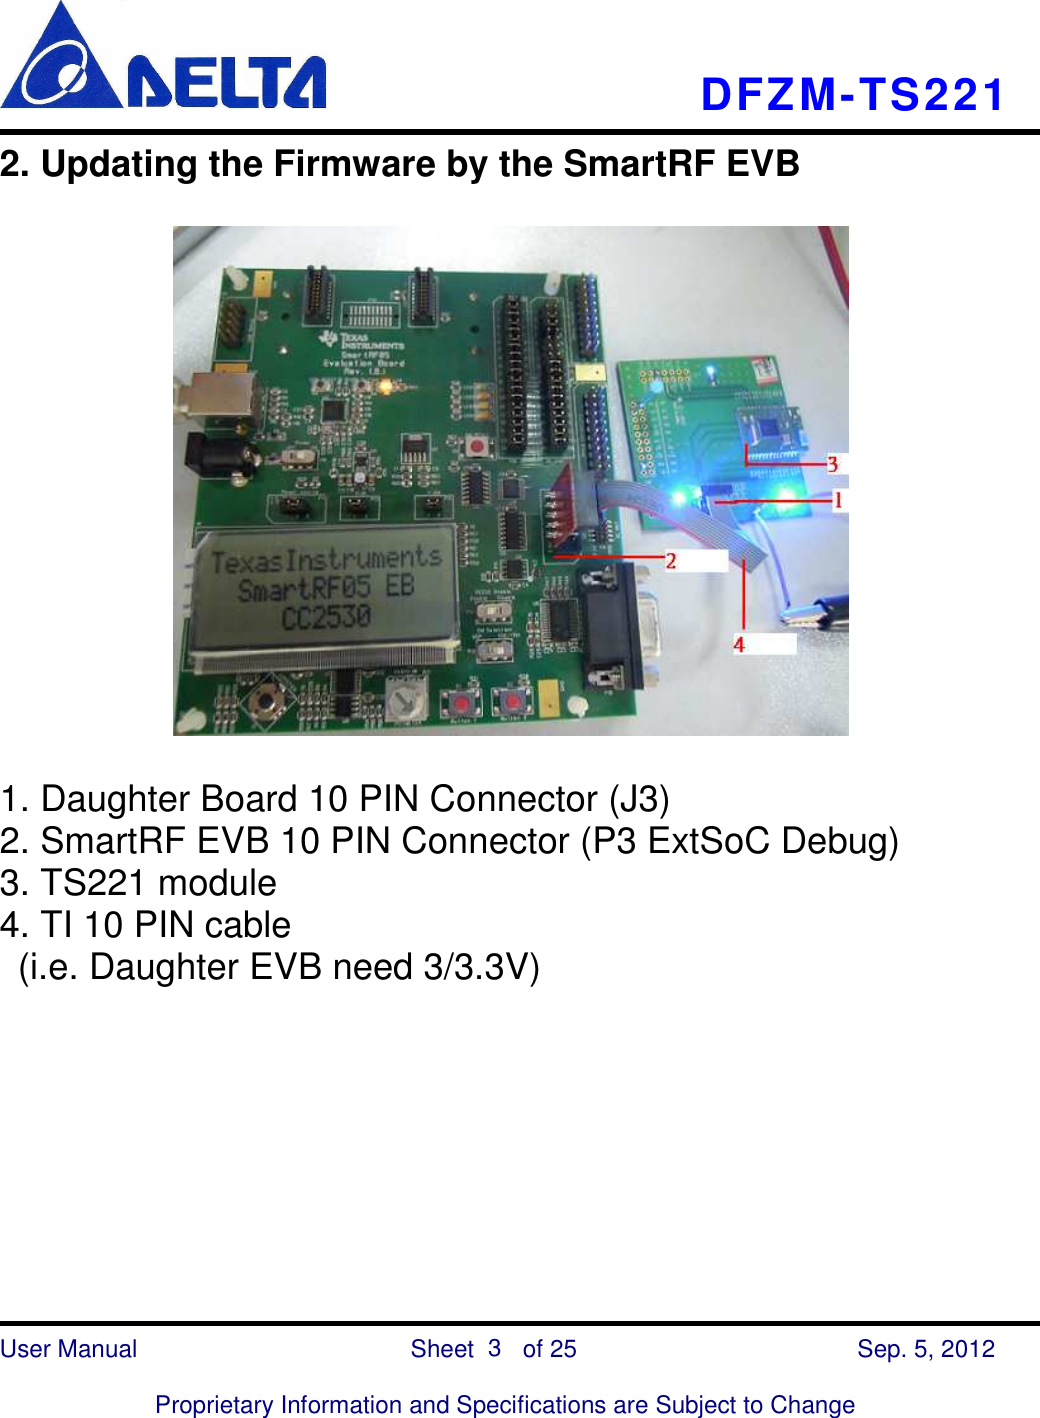    DFZM-TS221    User Manual                            Sheet        of 25      Sep. 5, 2012  Proprietary Information and Specifications are Subject to Change 3 2. Updating the Firmware by the SmartRF EVB    1. Daughter Board 10 PIN Connector (J3) 2. SmartRF EVB 10 PIN Connector (P3 ExtSoC Debug) 3. TS221 module 4. TI 10 PIN cable   (i.e. Daughter EVB need 3/3.3V)         